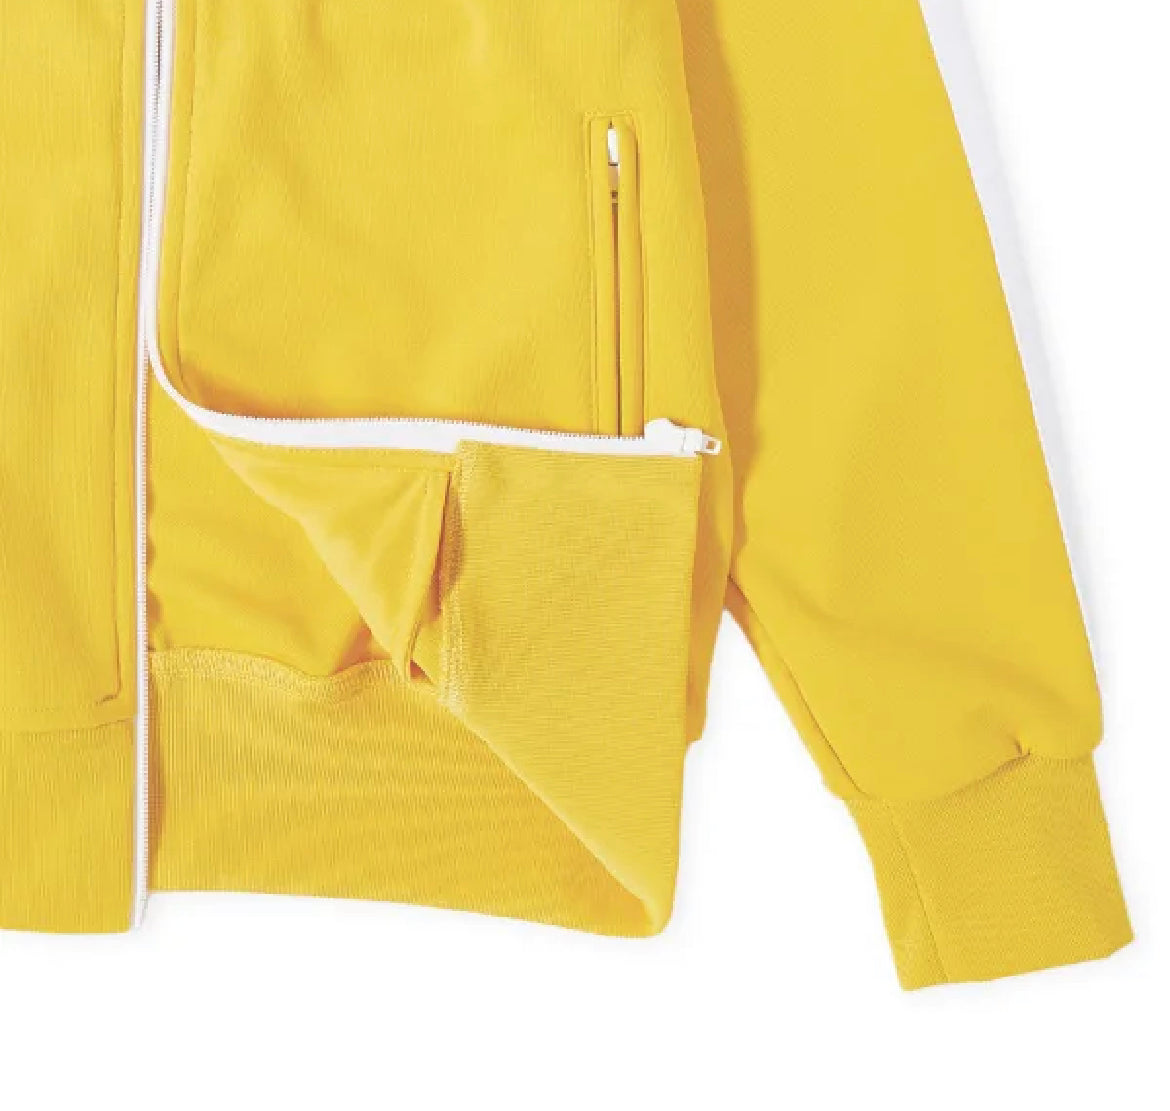 PALM ANGELS TRACKSUIT TRACK JACKET - YELLOW